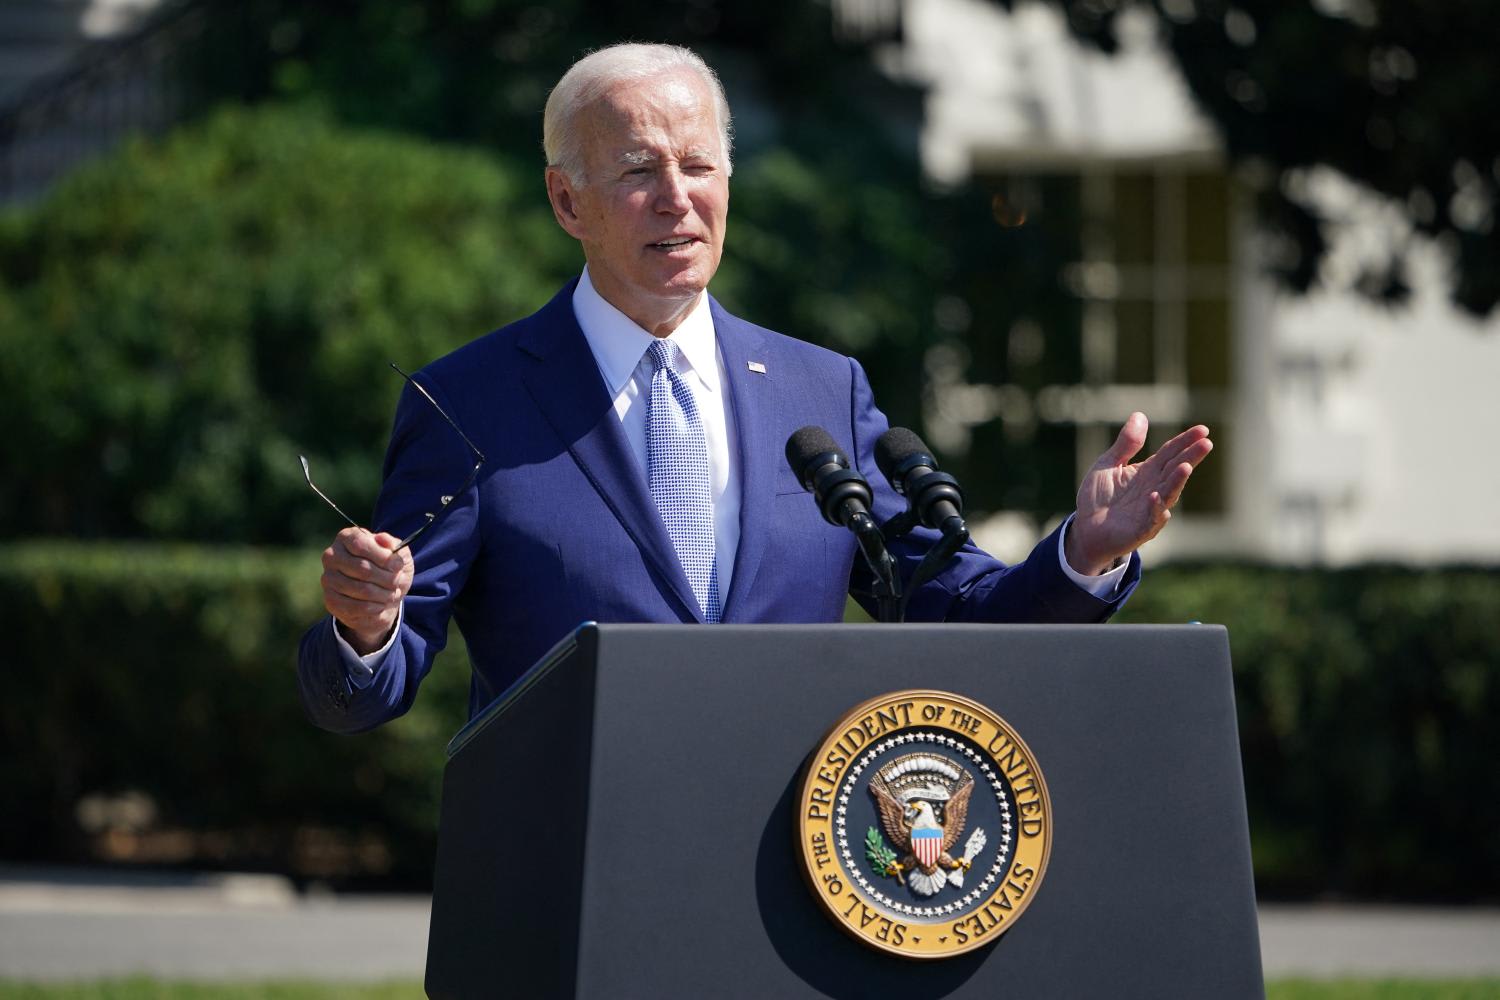 US President Joe Biden speaks during a signing ceremony for the CHIPS and Science Act of 2022, at an event on the South Lawn of the White House in Washington, DC, on Aug 9, 2022.